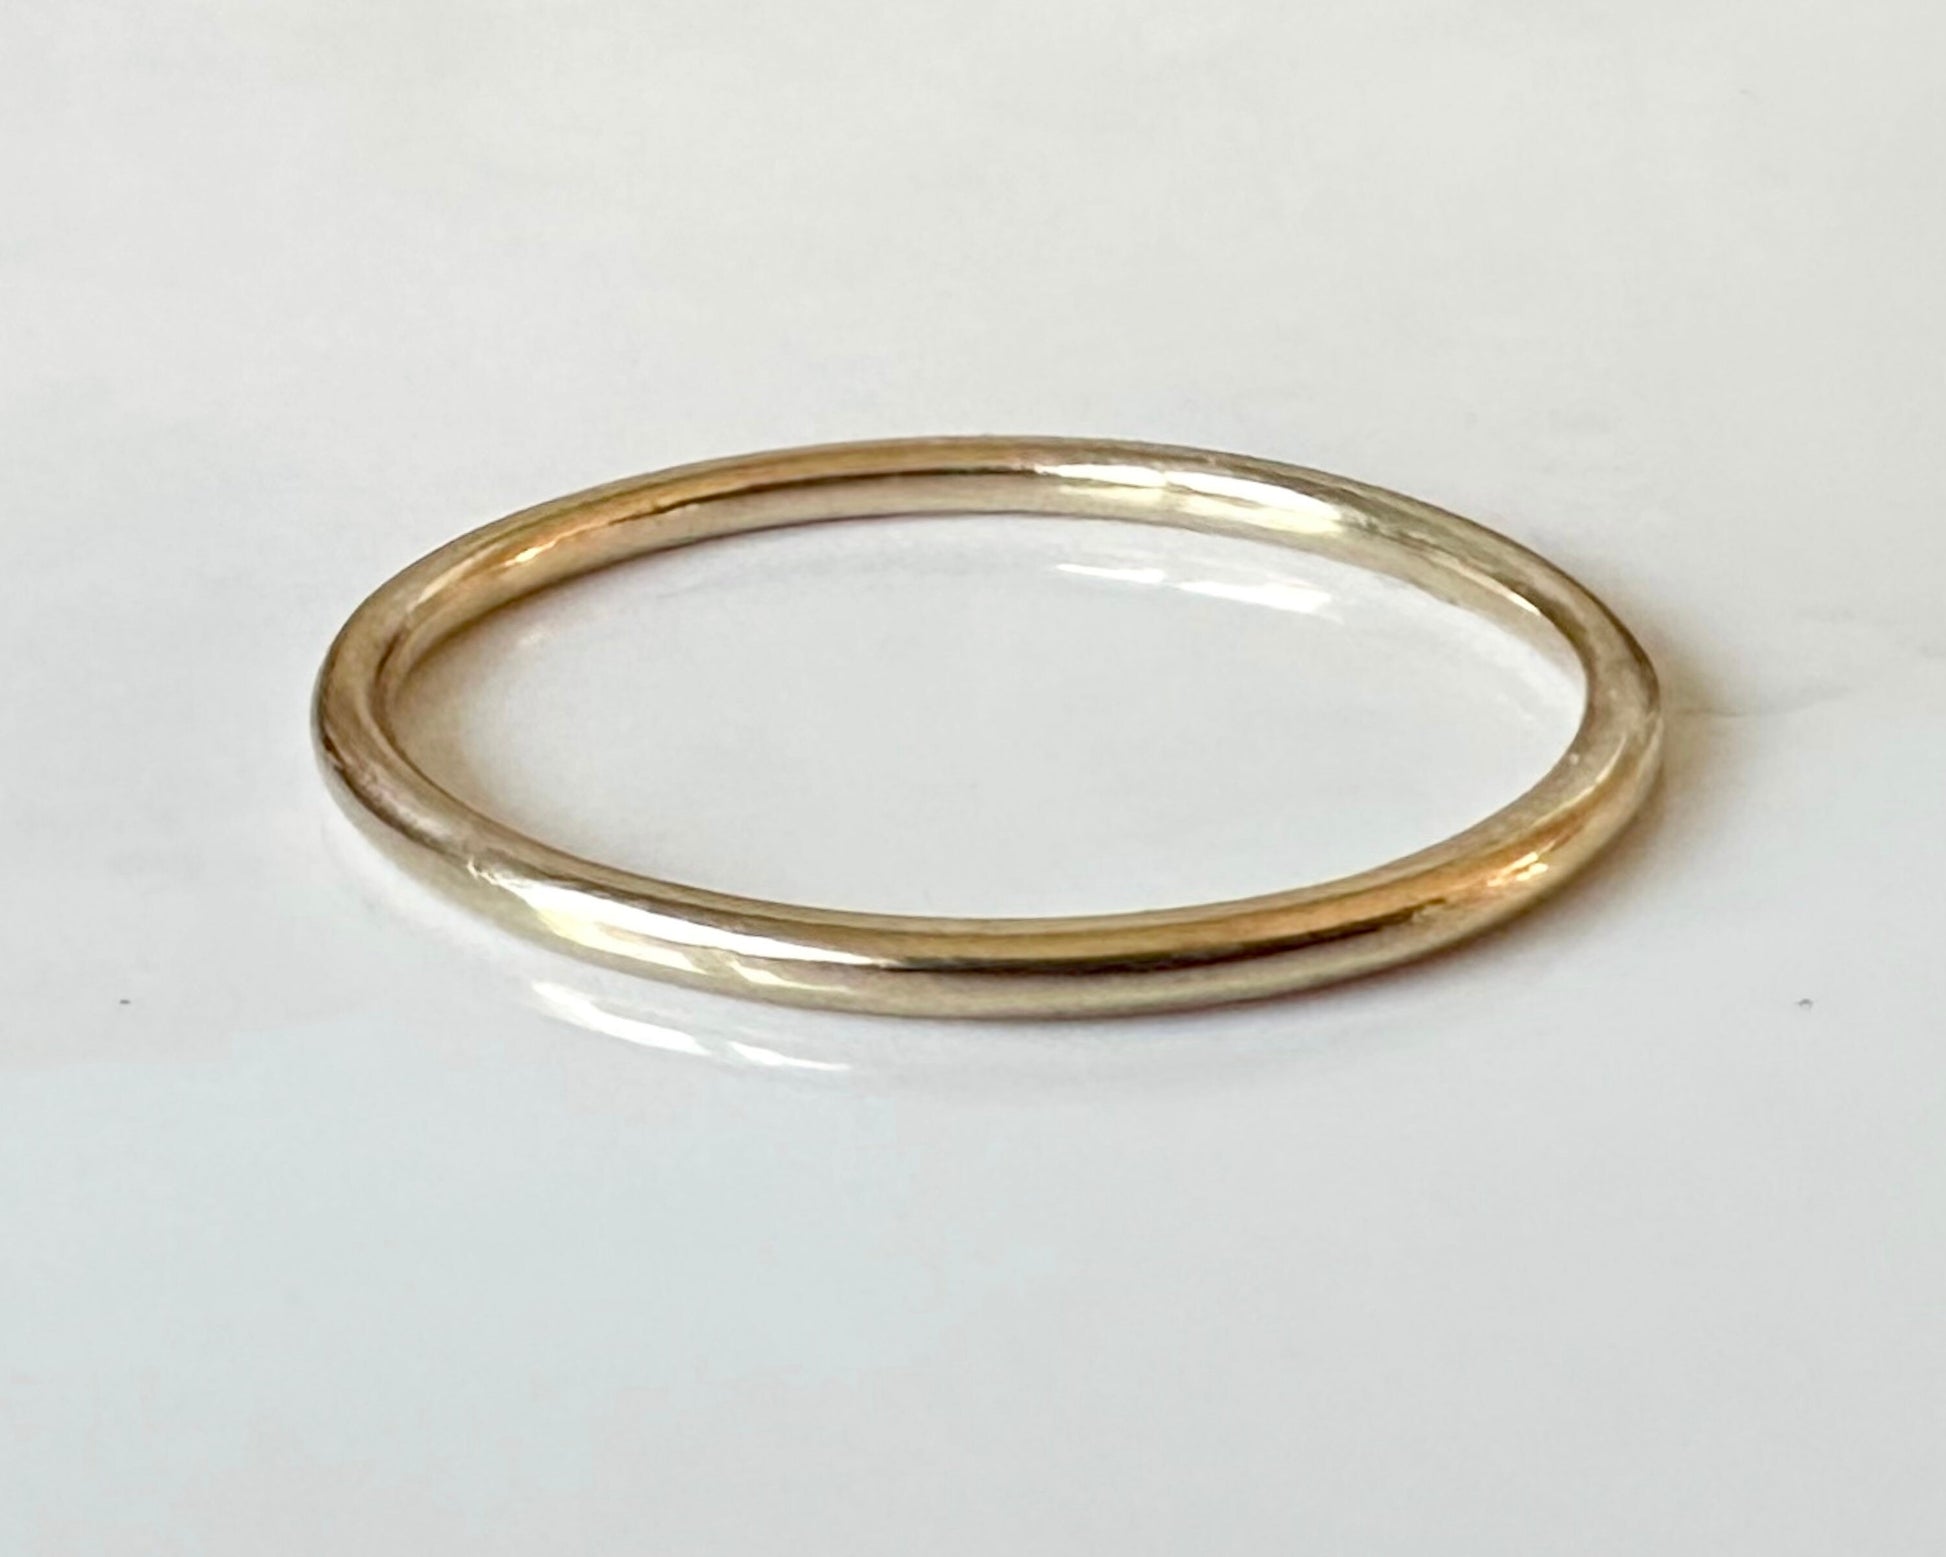 Solid 9ct Gold Ring, 1.2mm, 1.5mm, 1.8mm,Hallmarked plain and Simple Minimalist Ring Band, Handmade Gold Stackable Ring, Custom Wedding Band